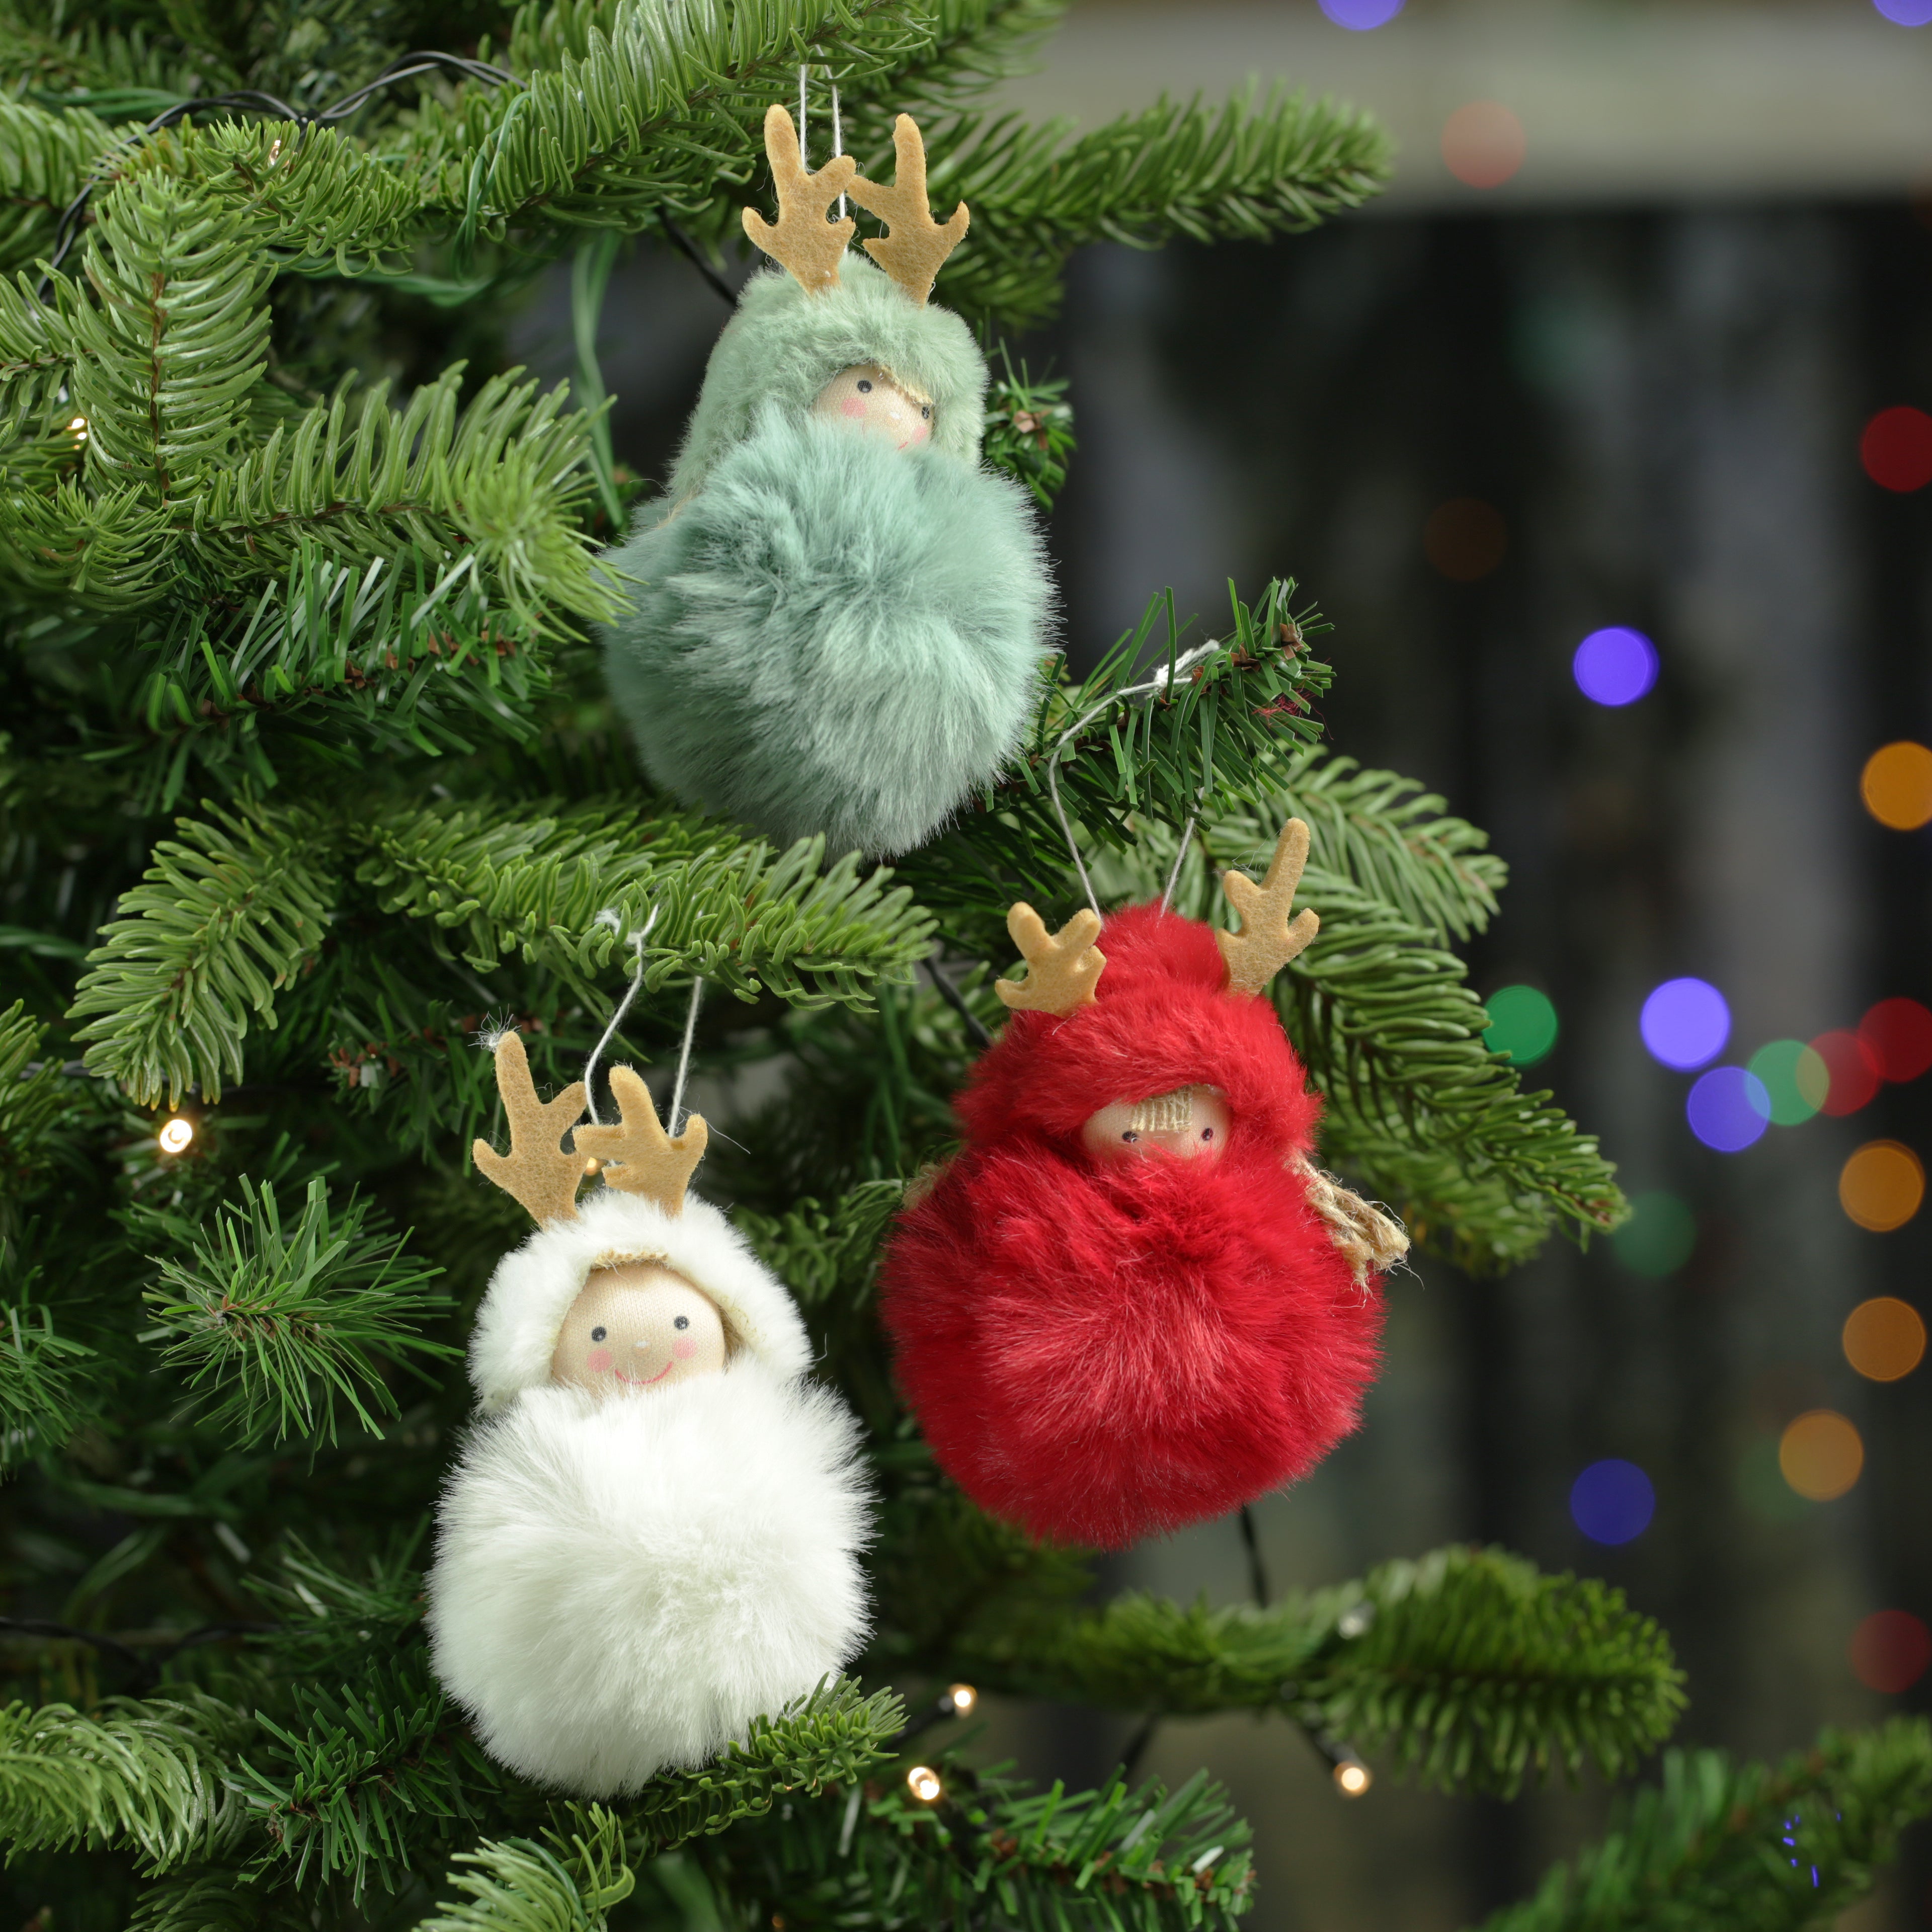 Fluffy Pom Pom Person with Antlers Hanging Decorations - Set of 3 - Bright